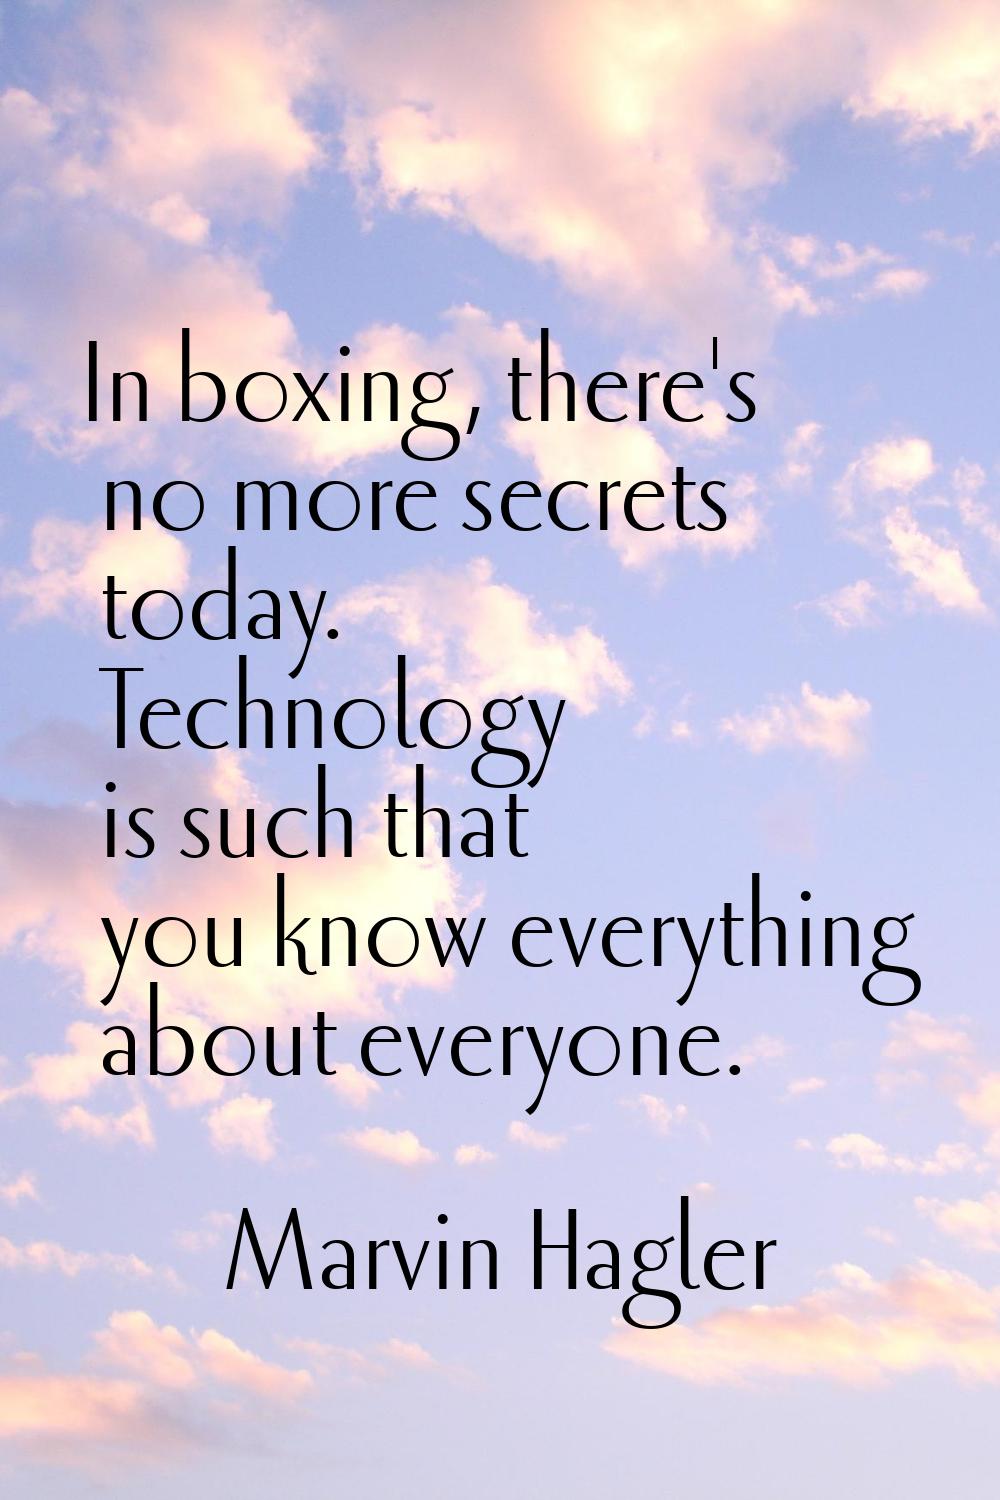 In boxing, there's no more secrets today. Technology is such that you know everything about everyon